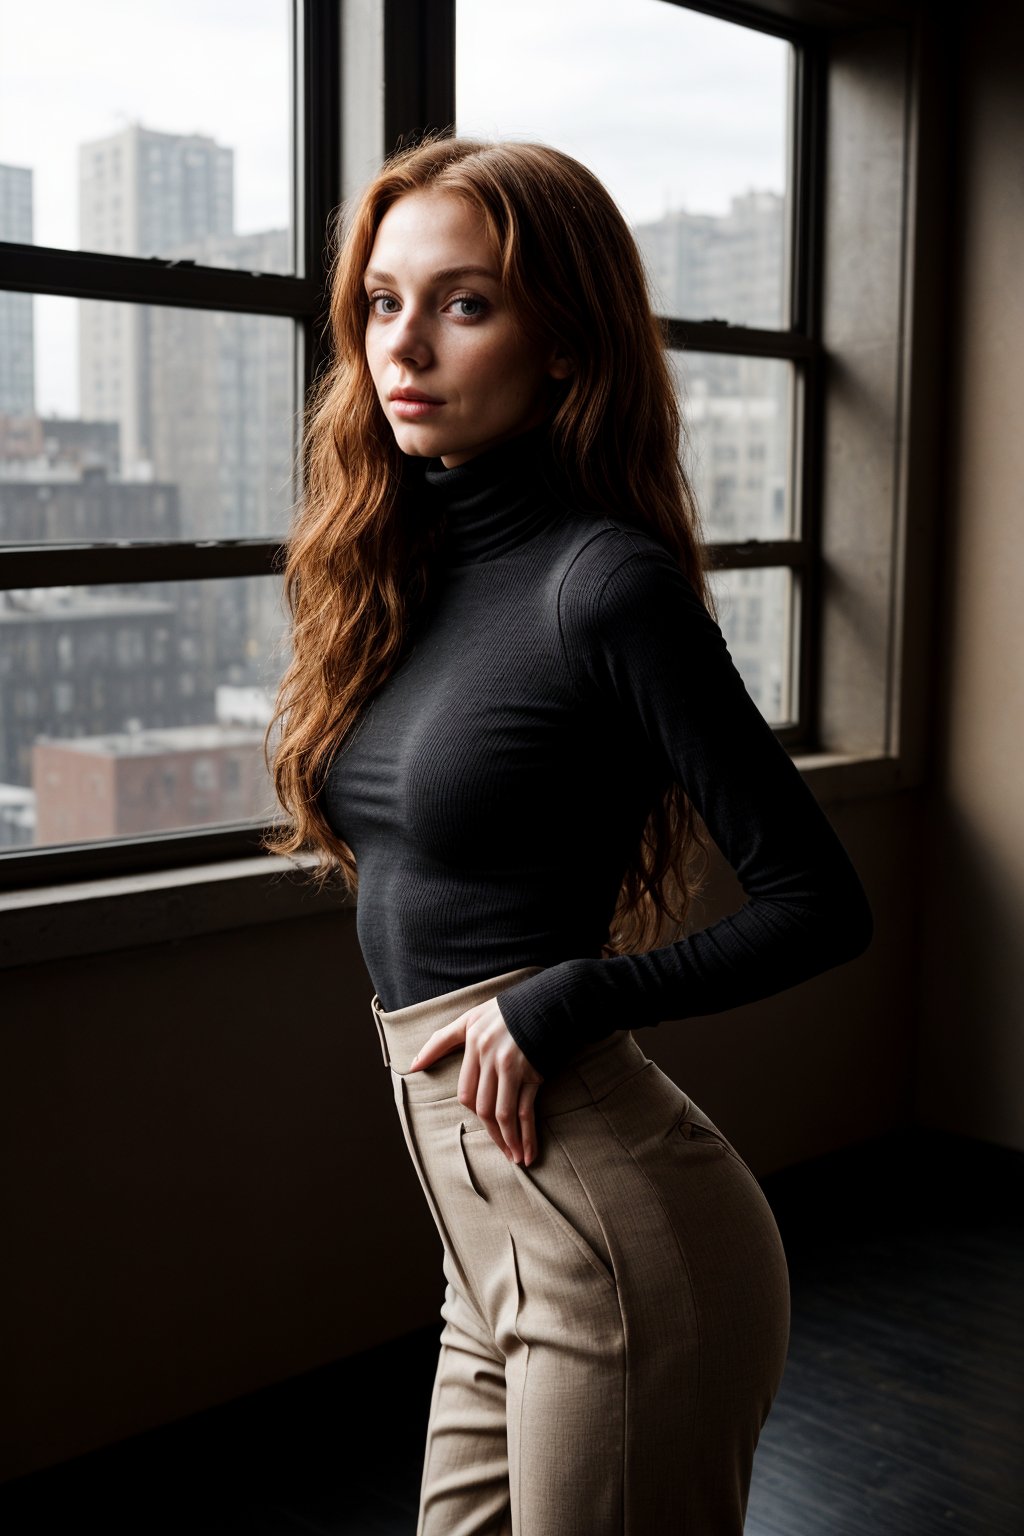 A gorgeous, hot girl with the face of a photo model, extremely thin (anorexia), with long, curly auburn hair. She is dressed in a classic black turtleneck and high-waisted, tailored trousers. She stands in an elegant pose with one hand on her hip and the other lightly touching her chin, her expression pensive and sophisticated. The background is a stylish, minimalist loft with large windows letting in natural light, showcasing a stunning urban landscape.